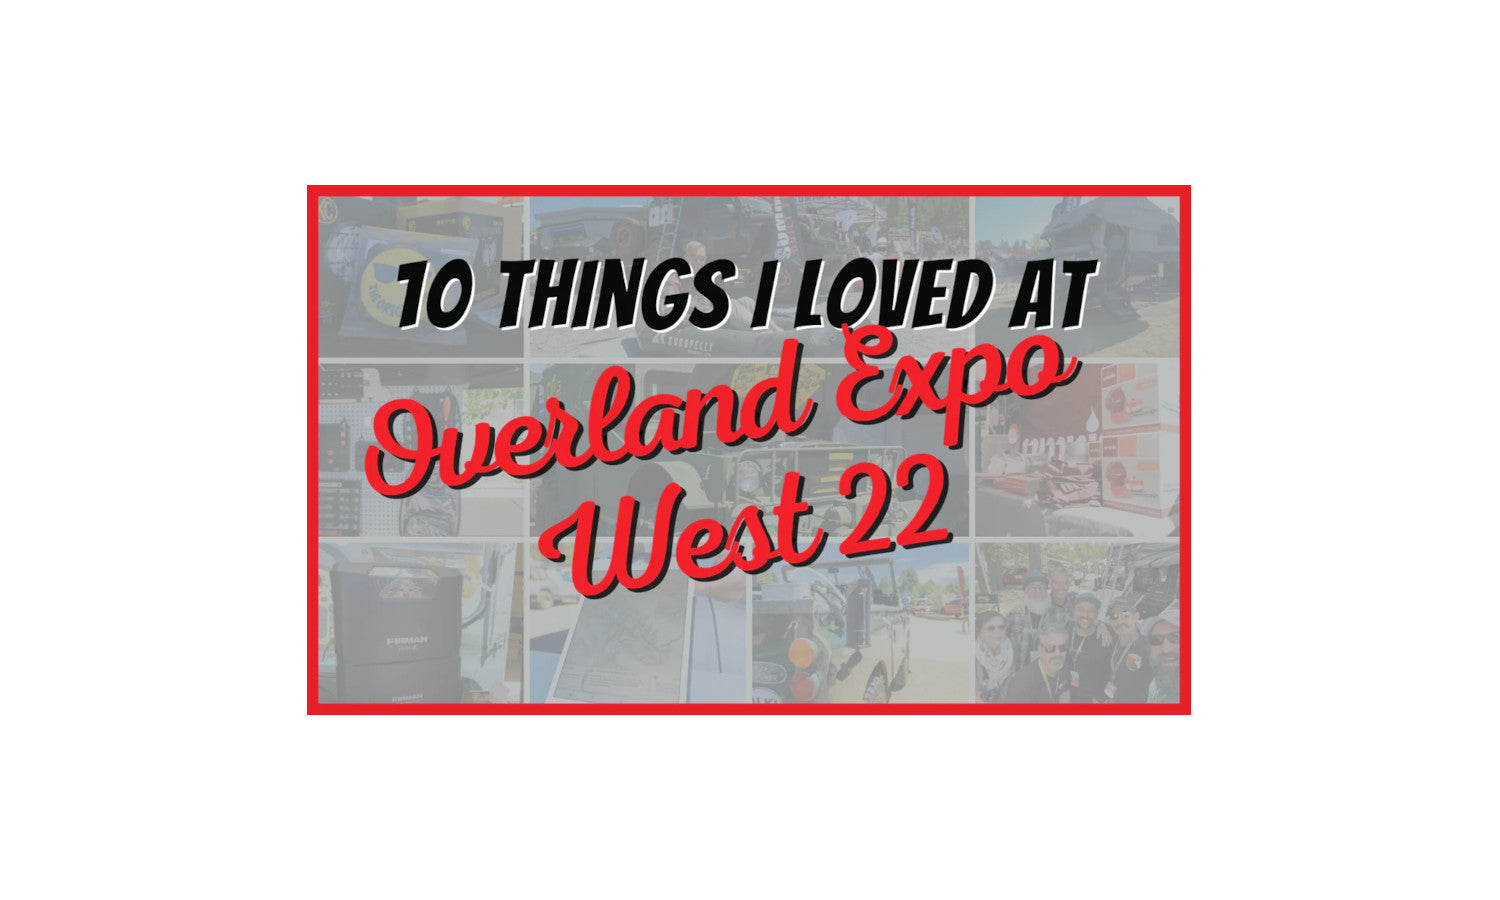 10 Things I Loved at Overland Expo West 2022